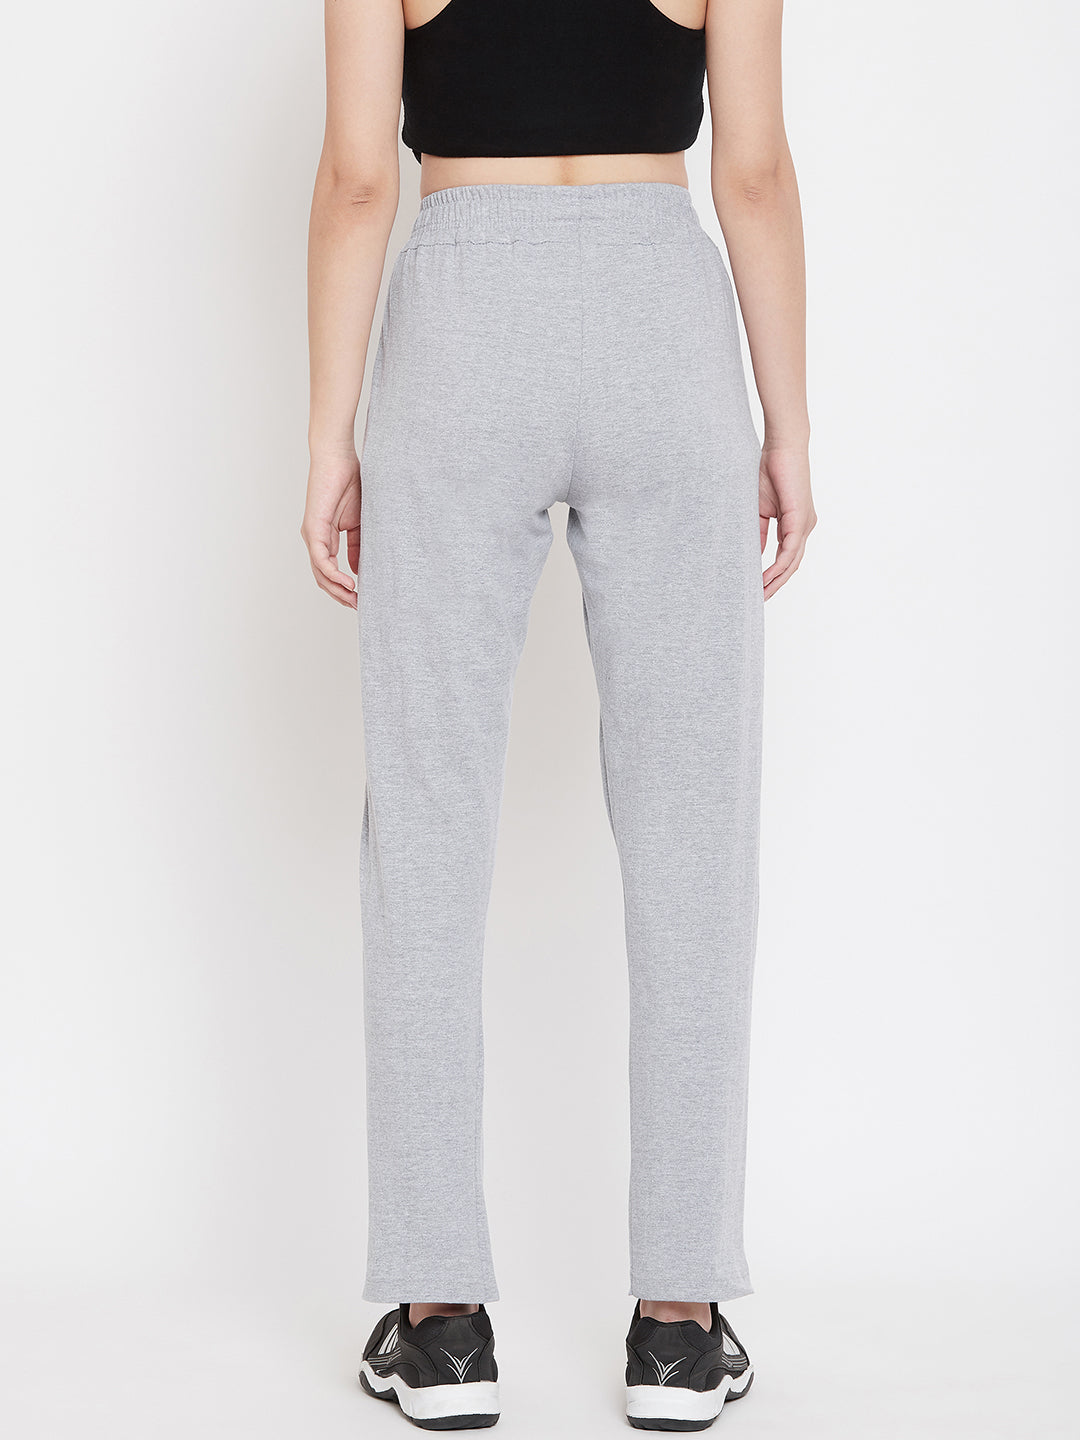 Women's Pack of 2 Track Pants-Navy and Light Grey